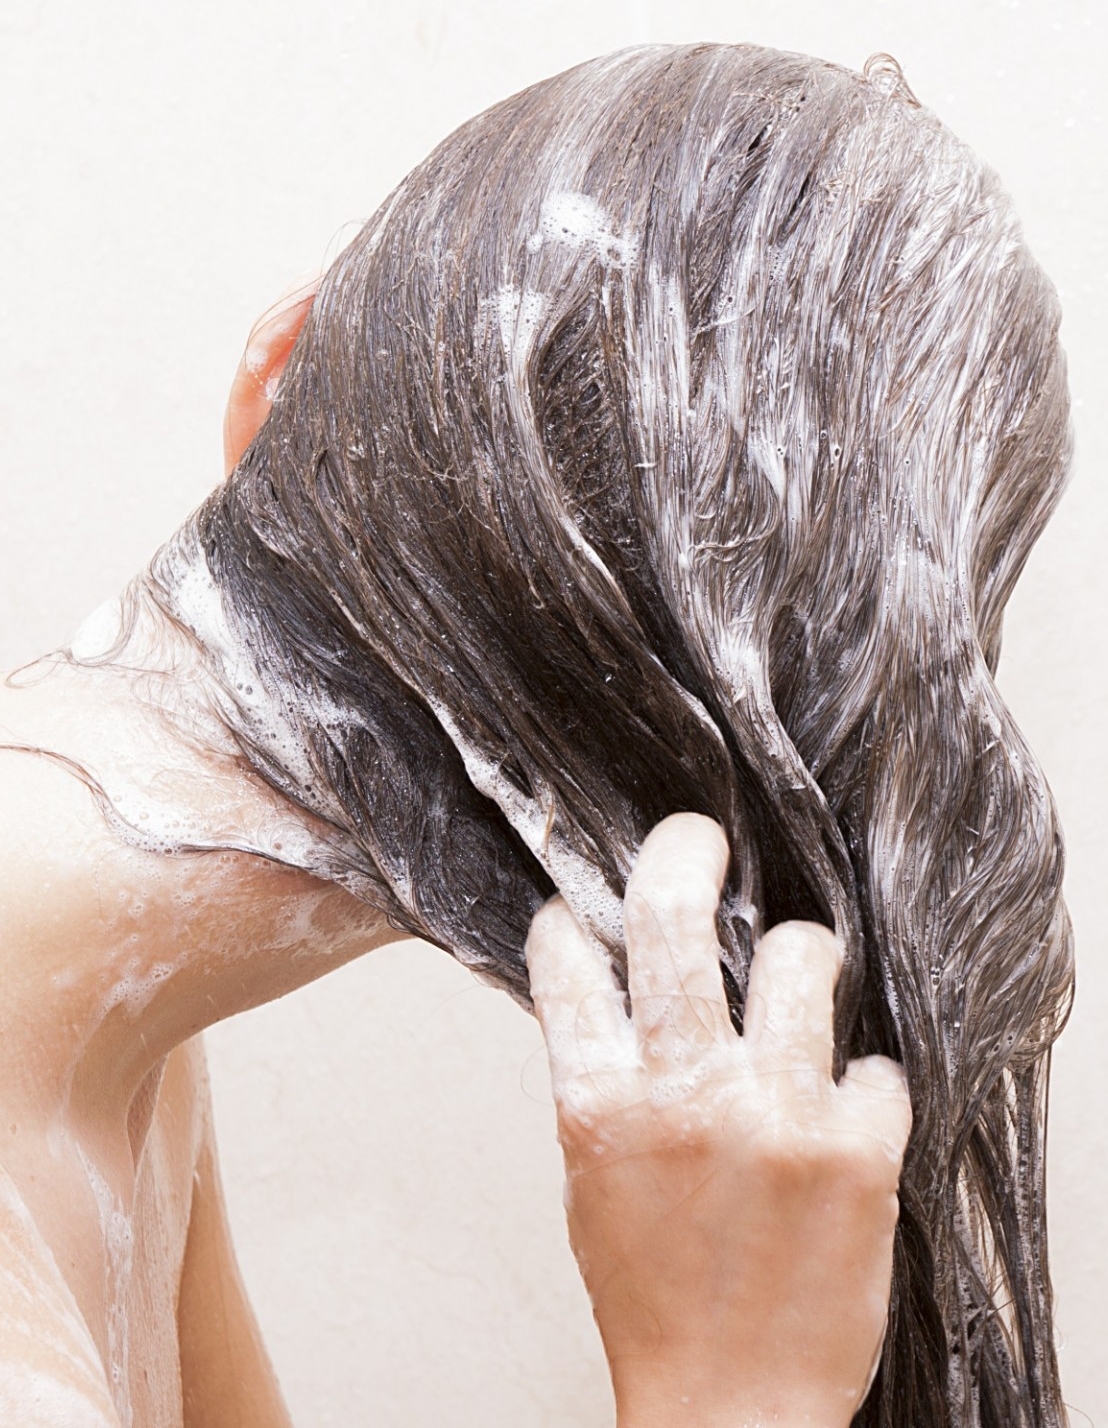 Shocking toxins in your hair fall shampoo and how to avoid it